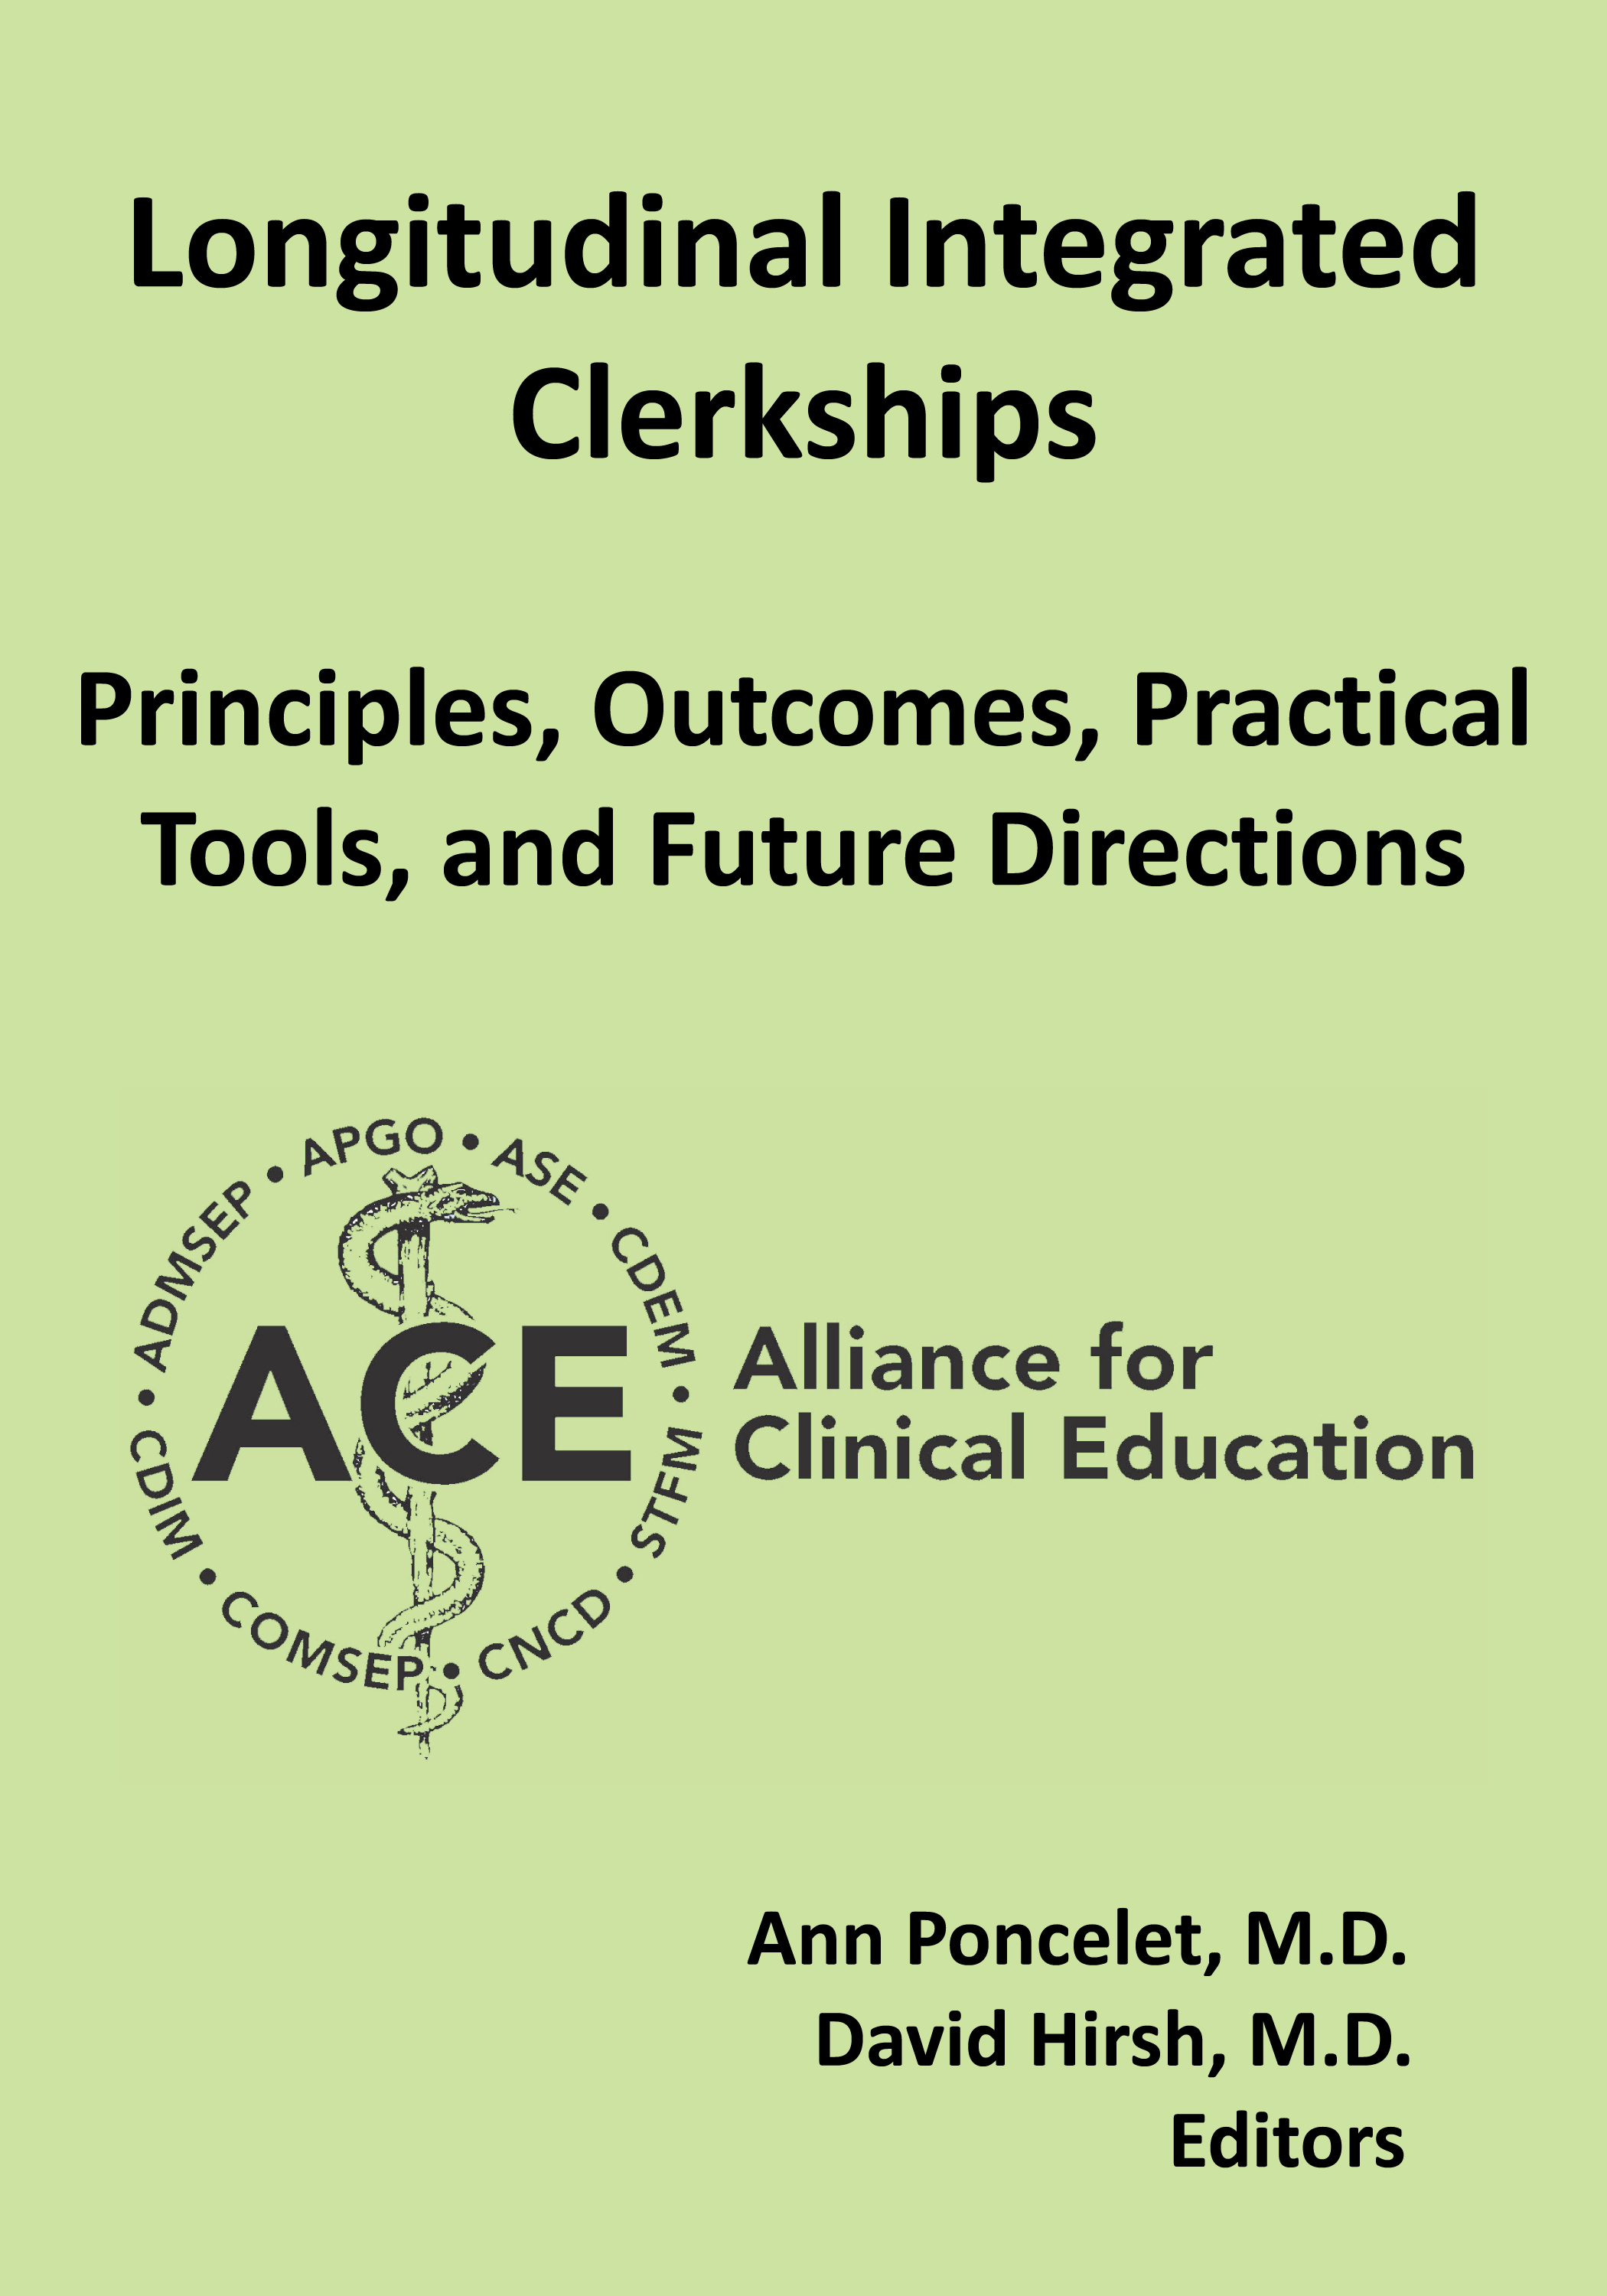 Longitudinal Integrated Clerkships by the Alliance for Clinical Education